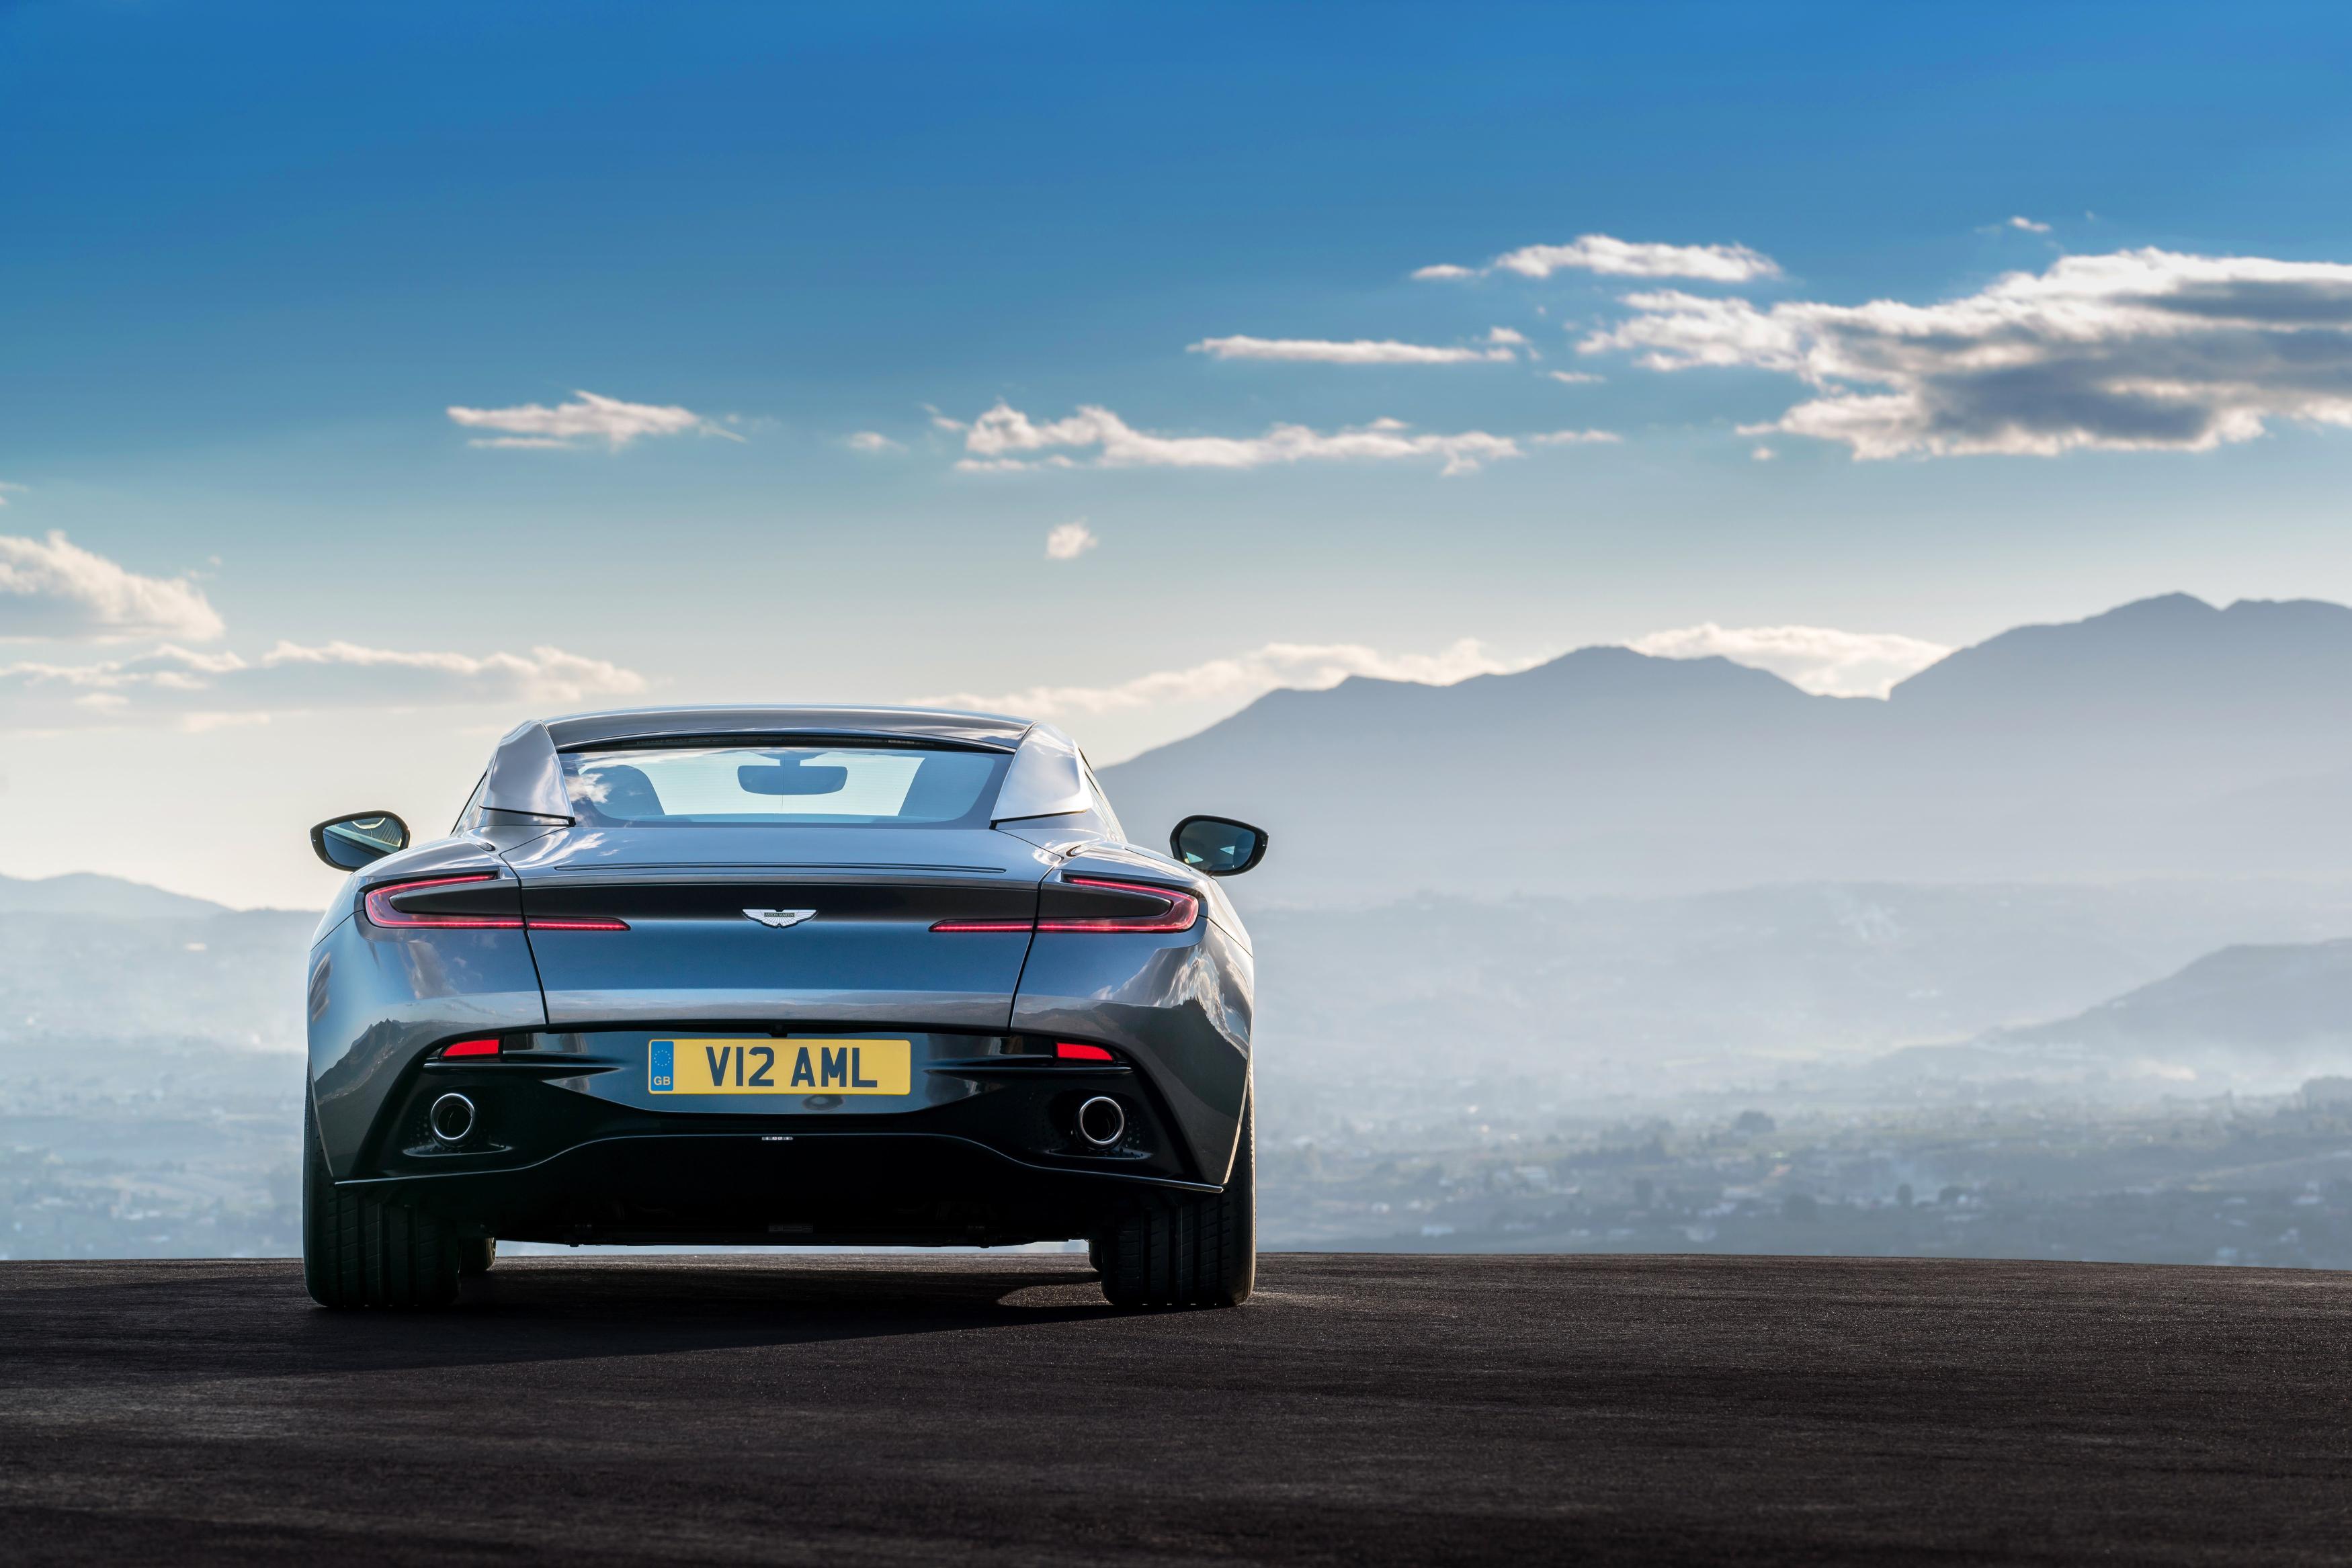 The new 2016 Aston Martin DB11 features a 600bhp, 5.2-litre V12 engine